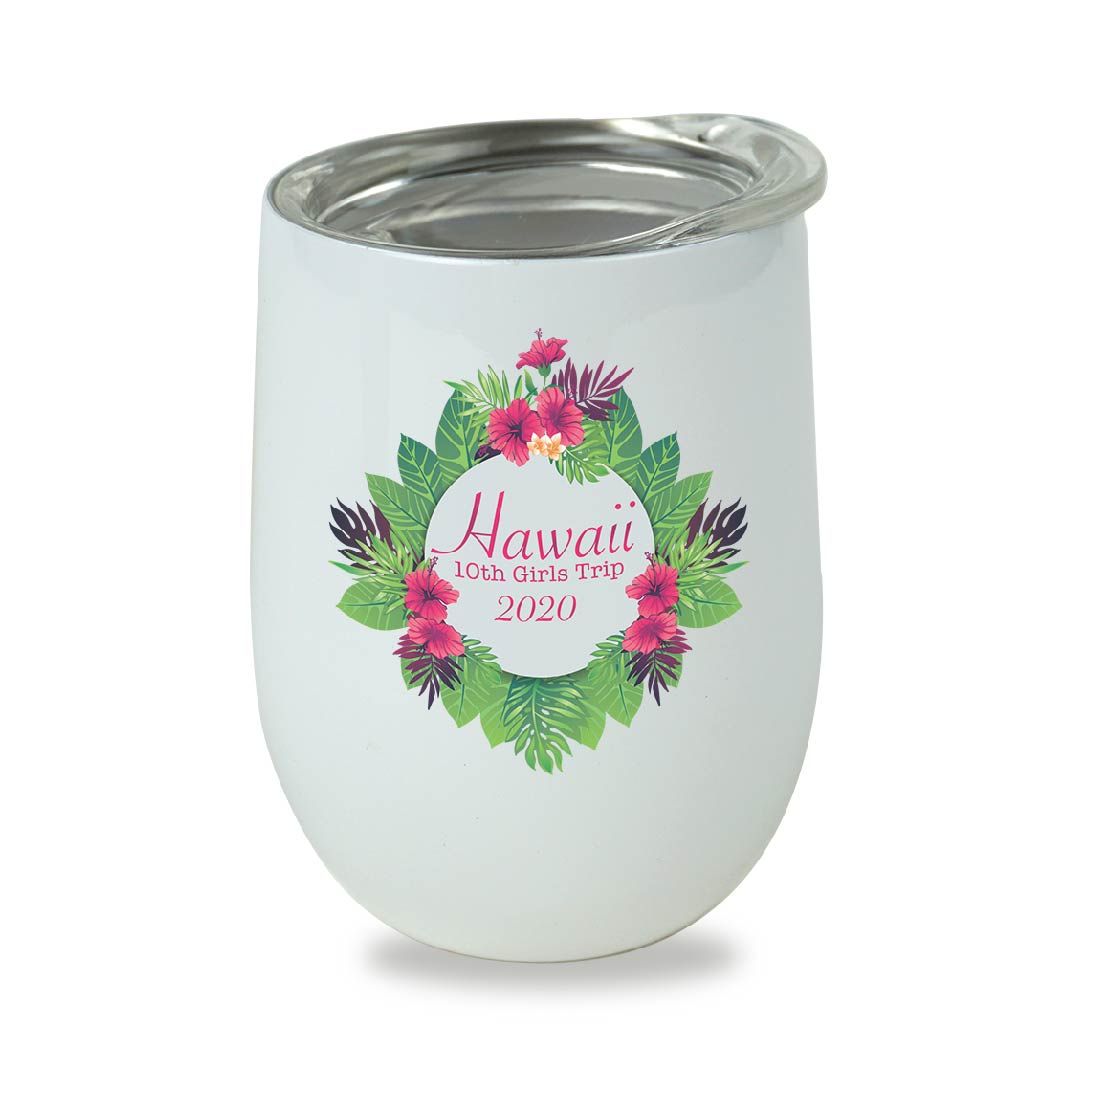 Stainless Steel Sublimation Wine Tumbler - 12oz. - 50/Case